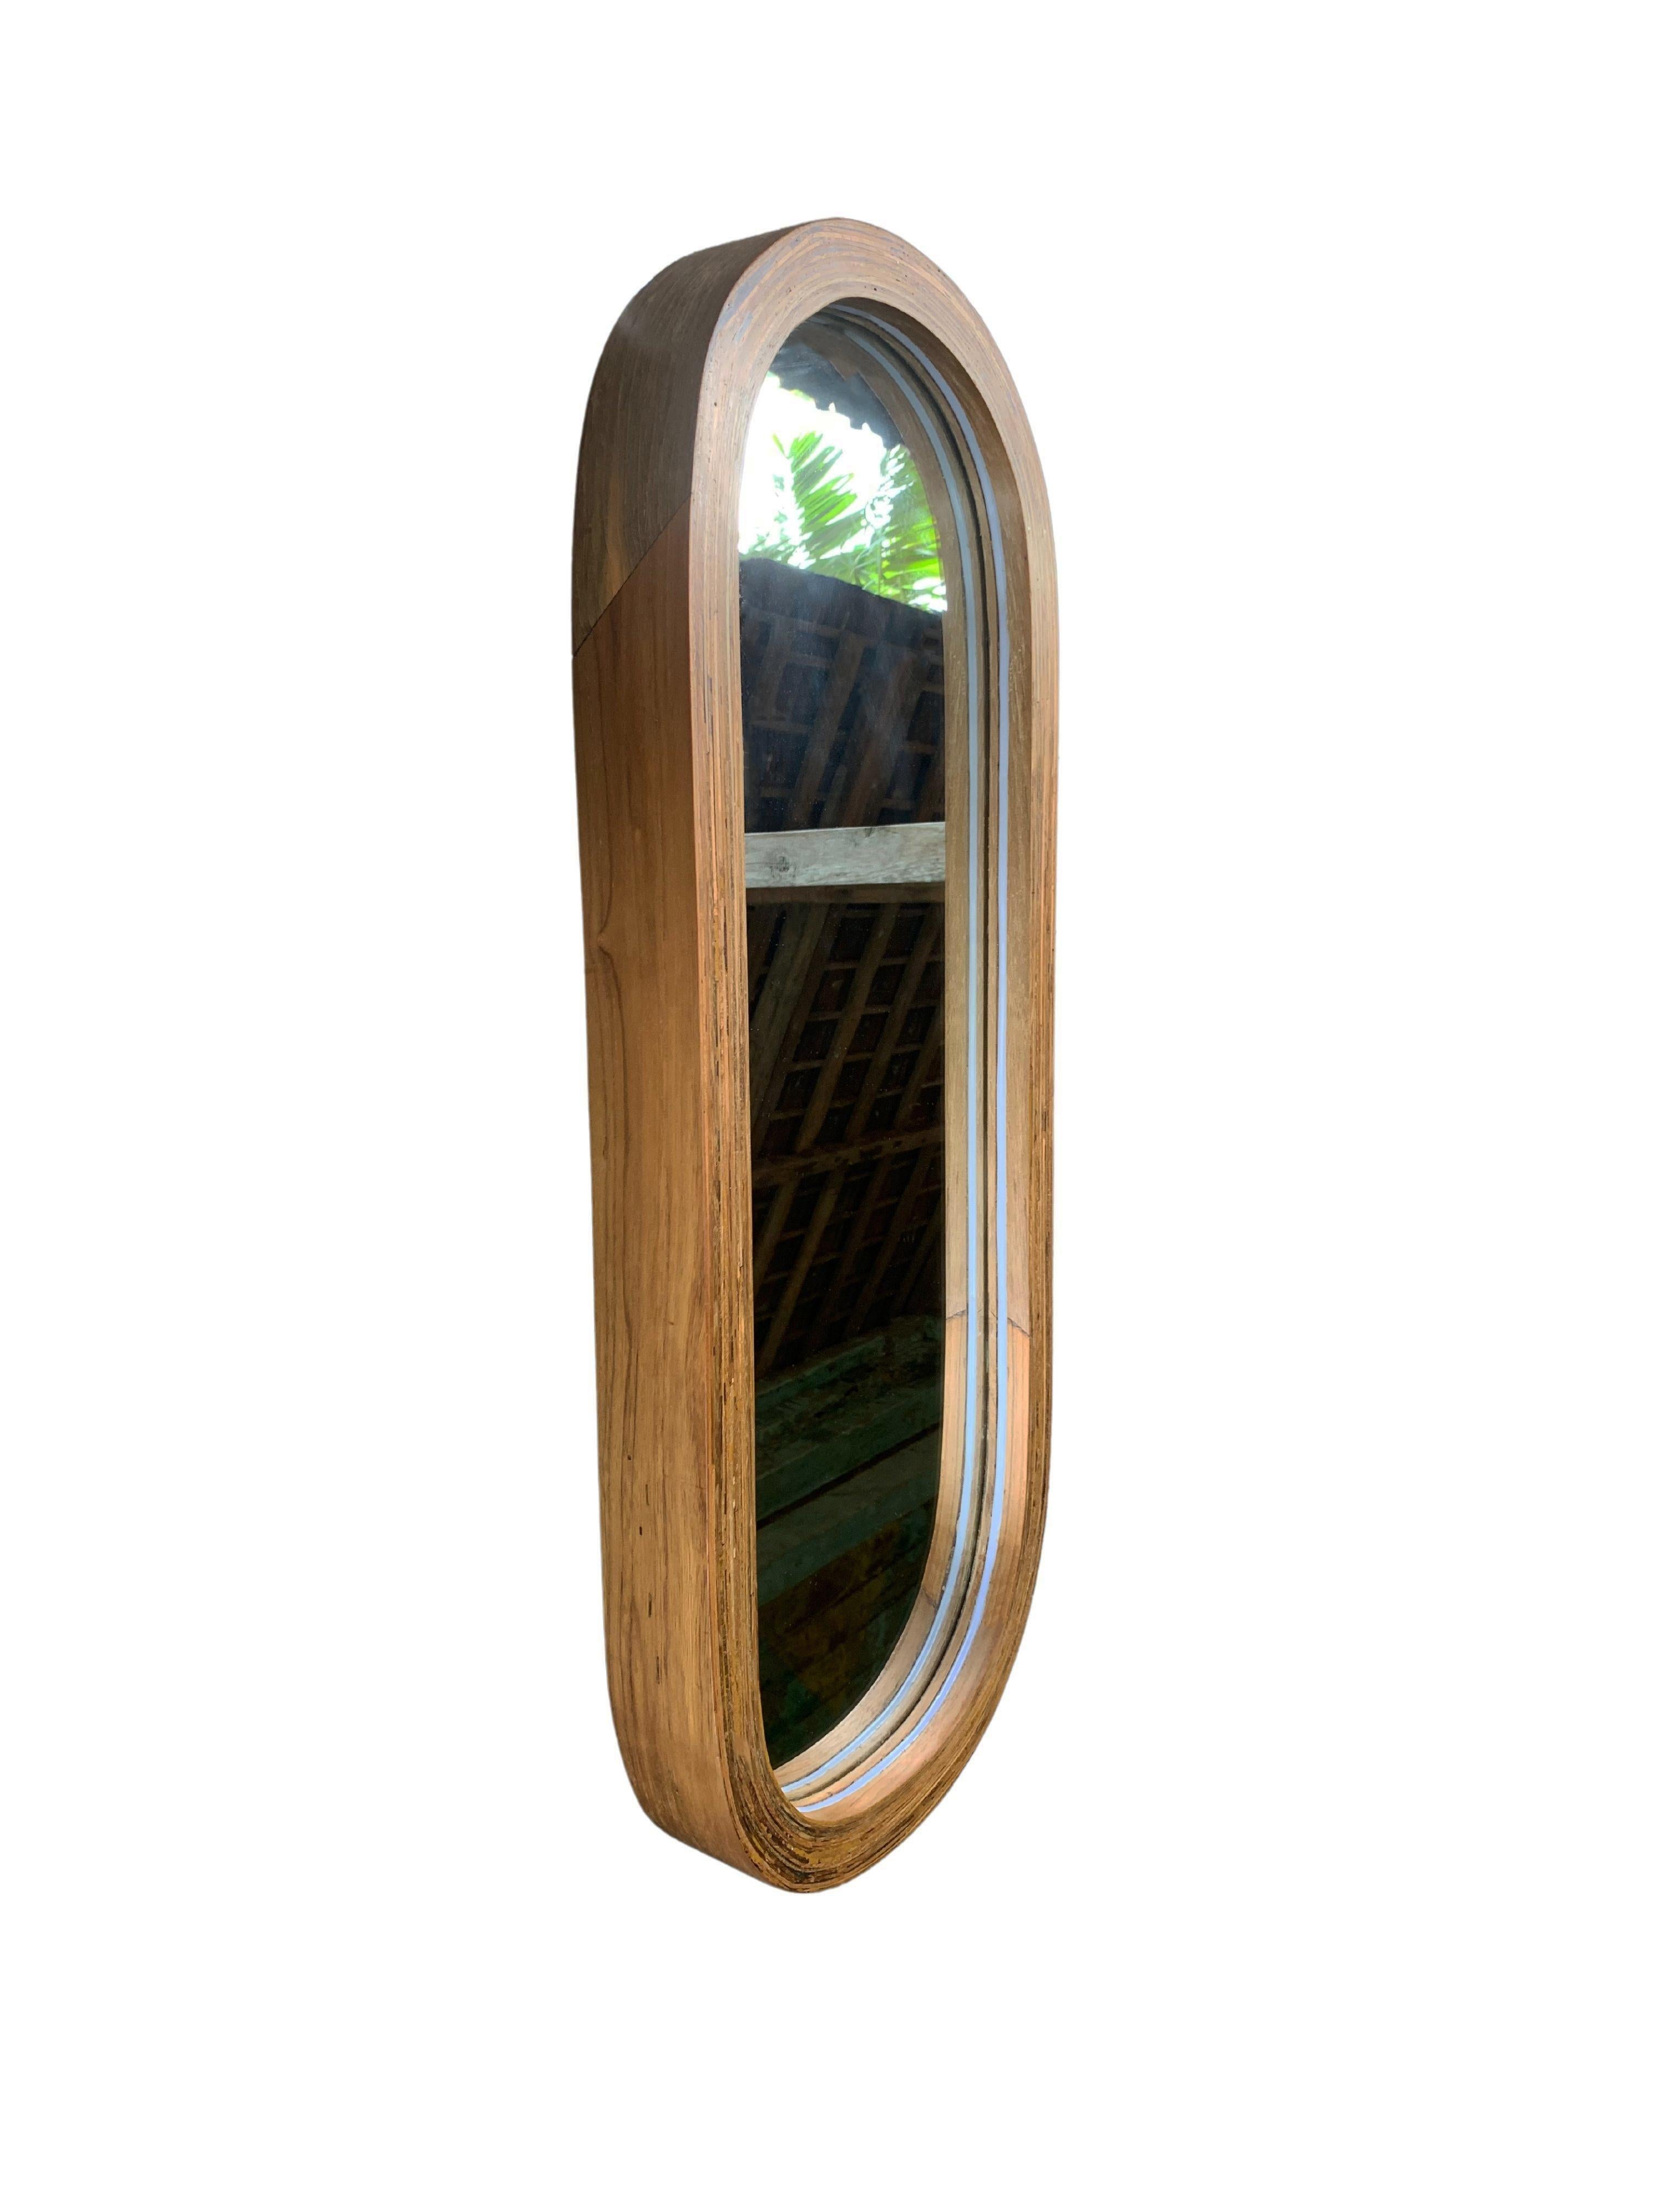 This mirror features a stunning reclaimed teak wood frame & polished finish. With wood sourced from old colonial houses in Indonesia. The wood texture adds to its charm. It features a plug in LED light rim. A wonderful modern organic object to bring